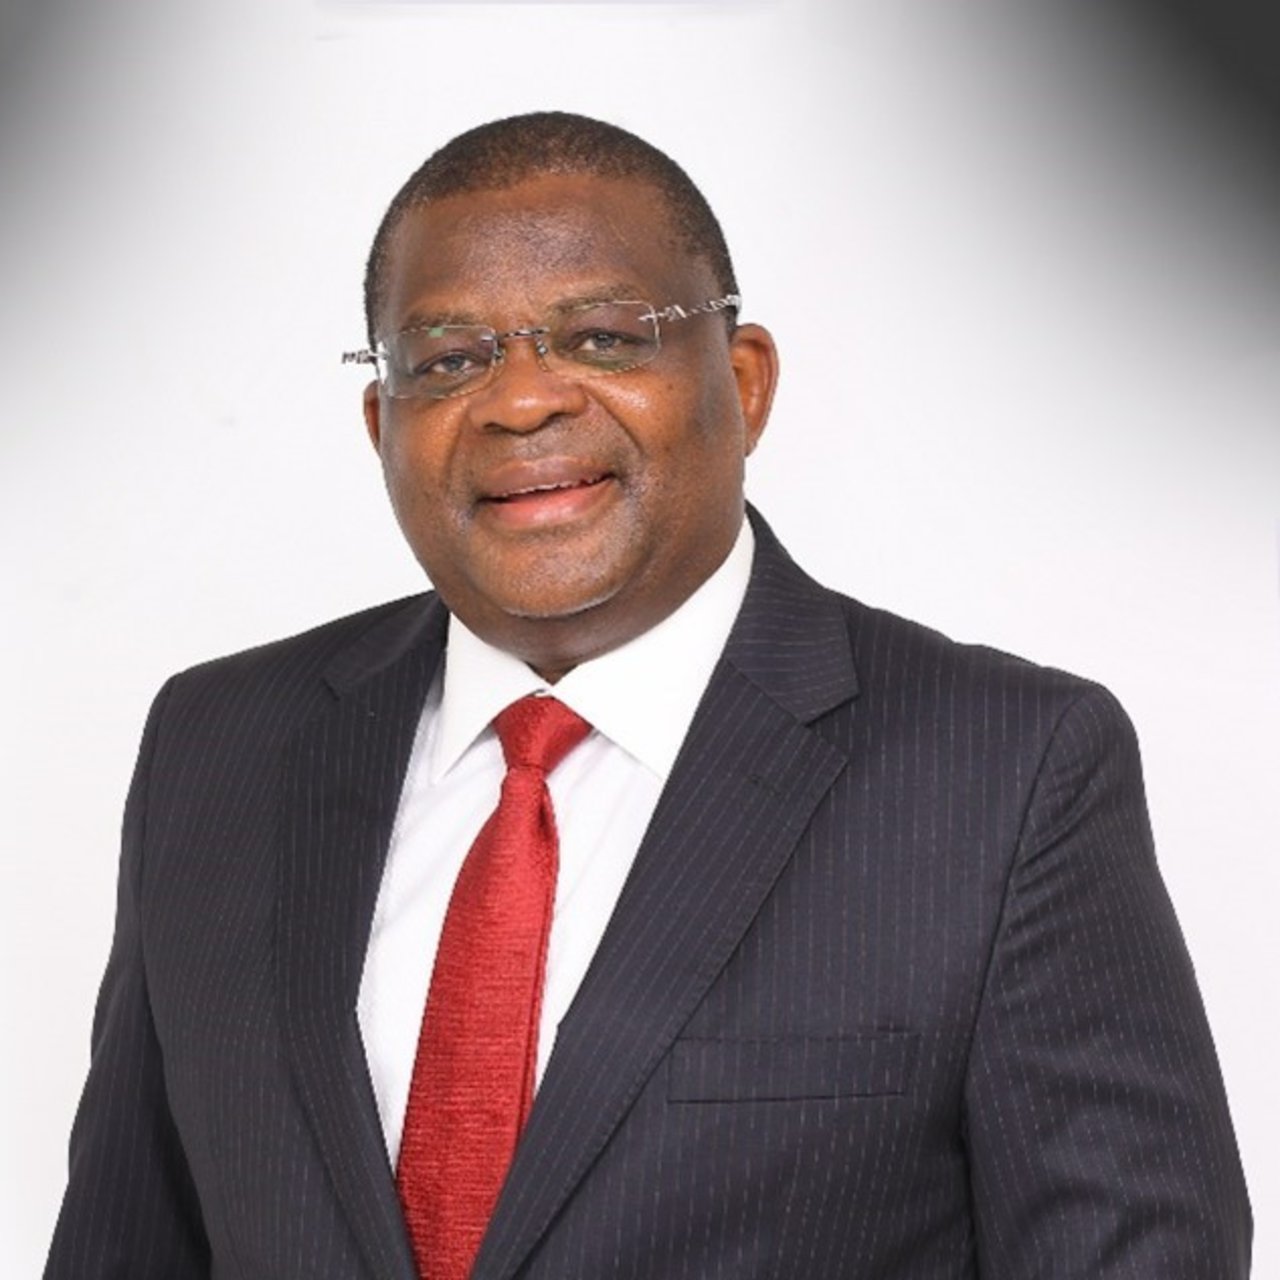 Ambassador Robinson Githae is pictured in a suit, smiling at the camera